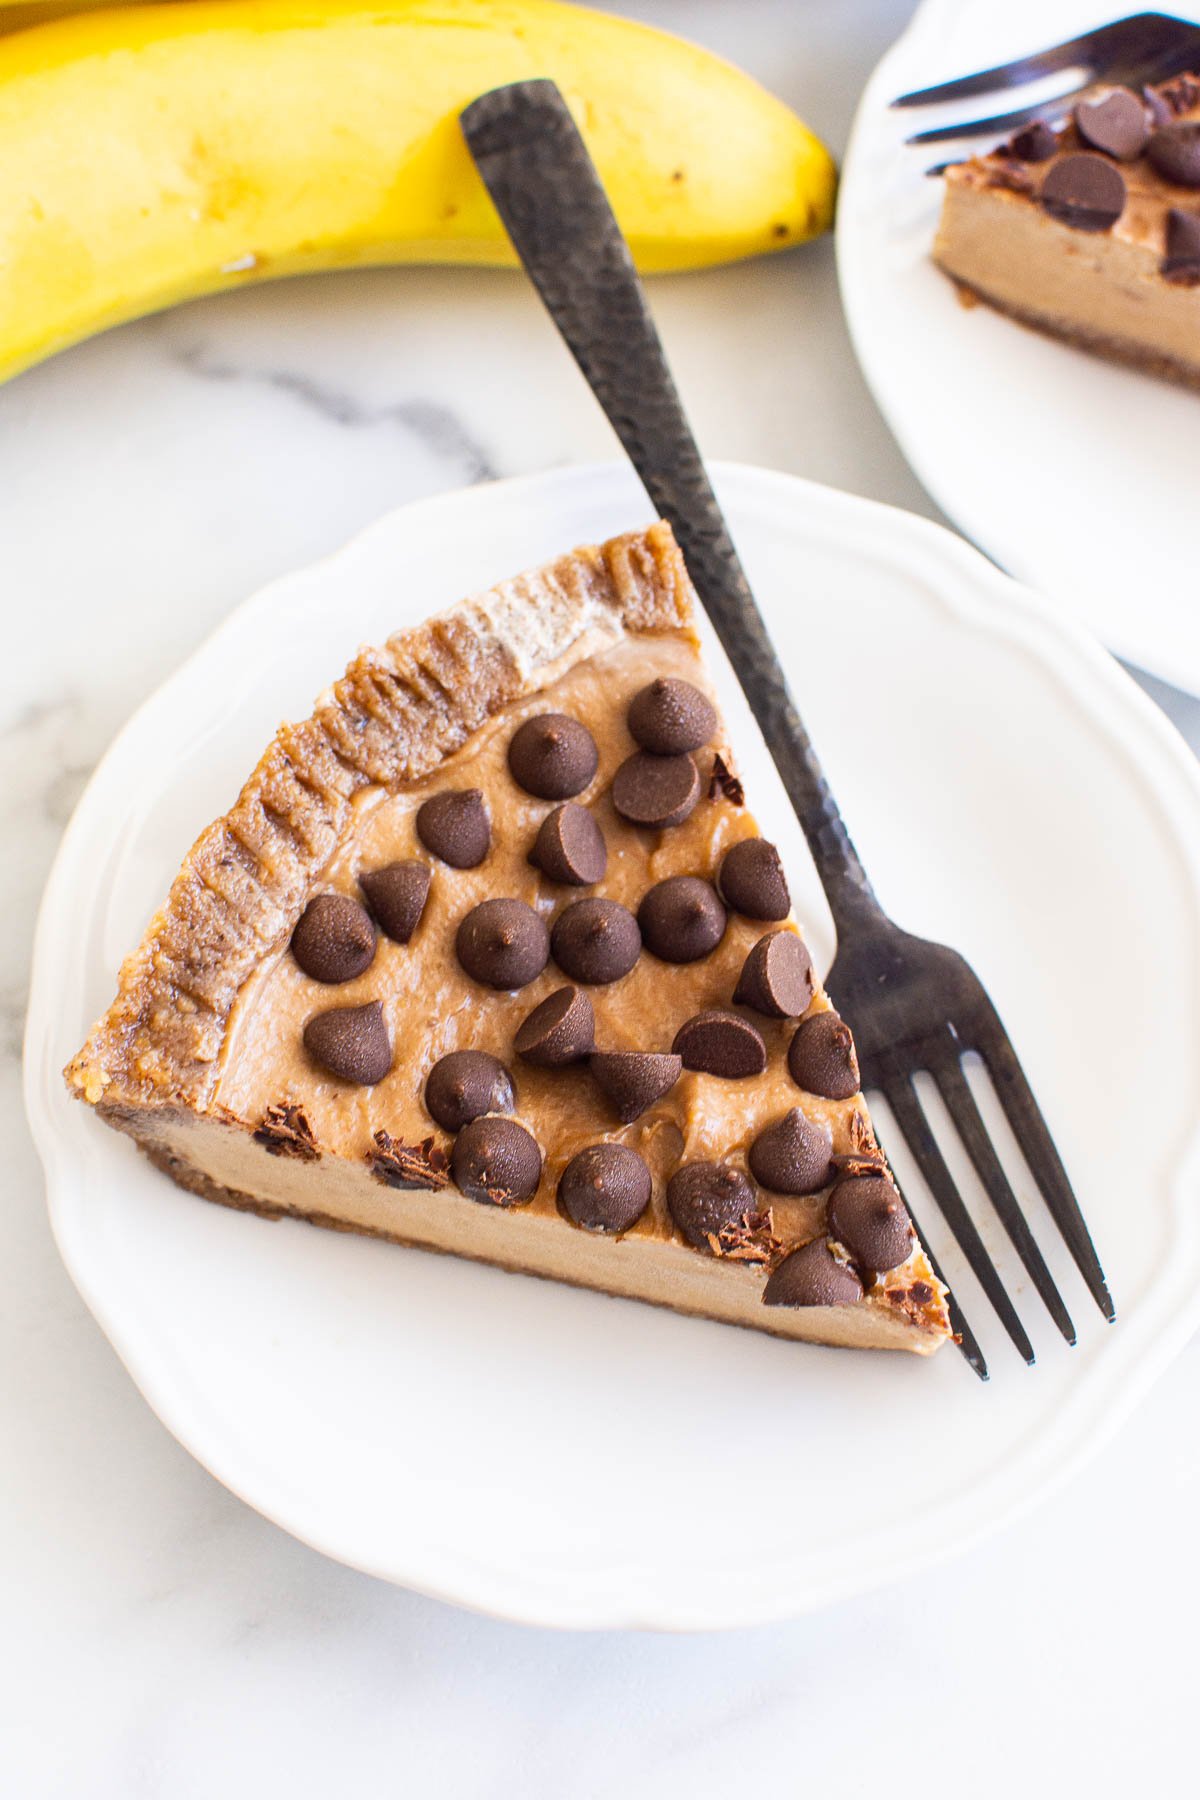 A slice of no bake peanut butter pie on a plate.